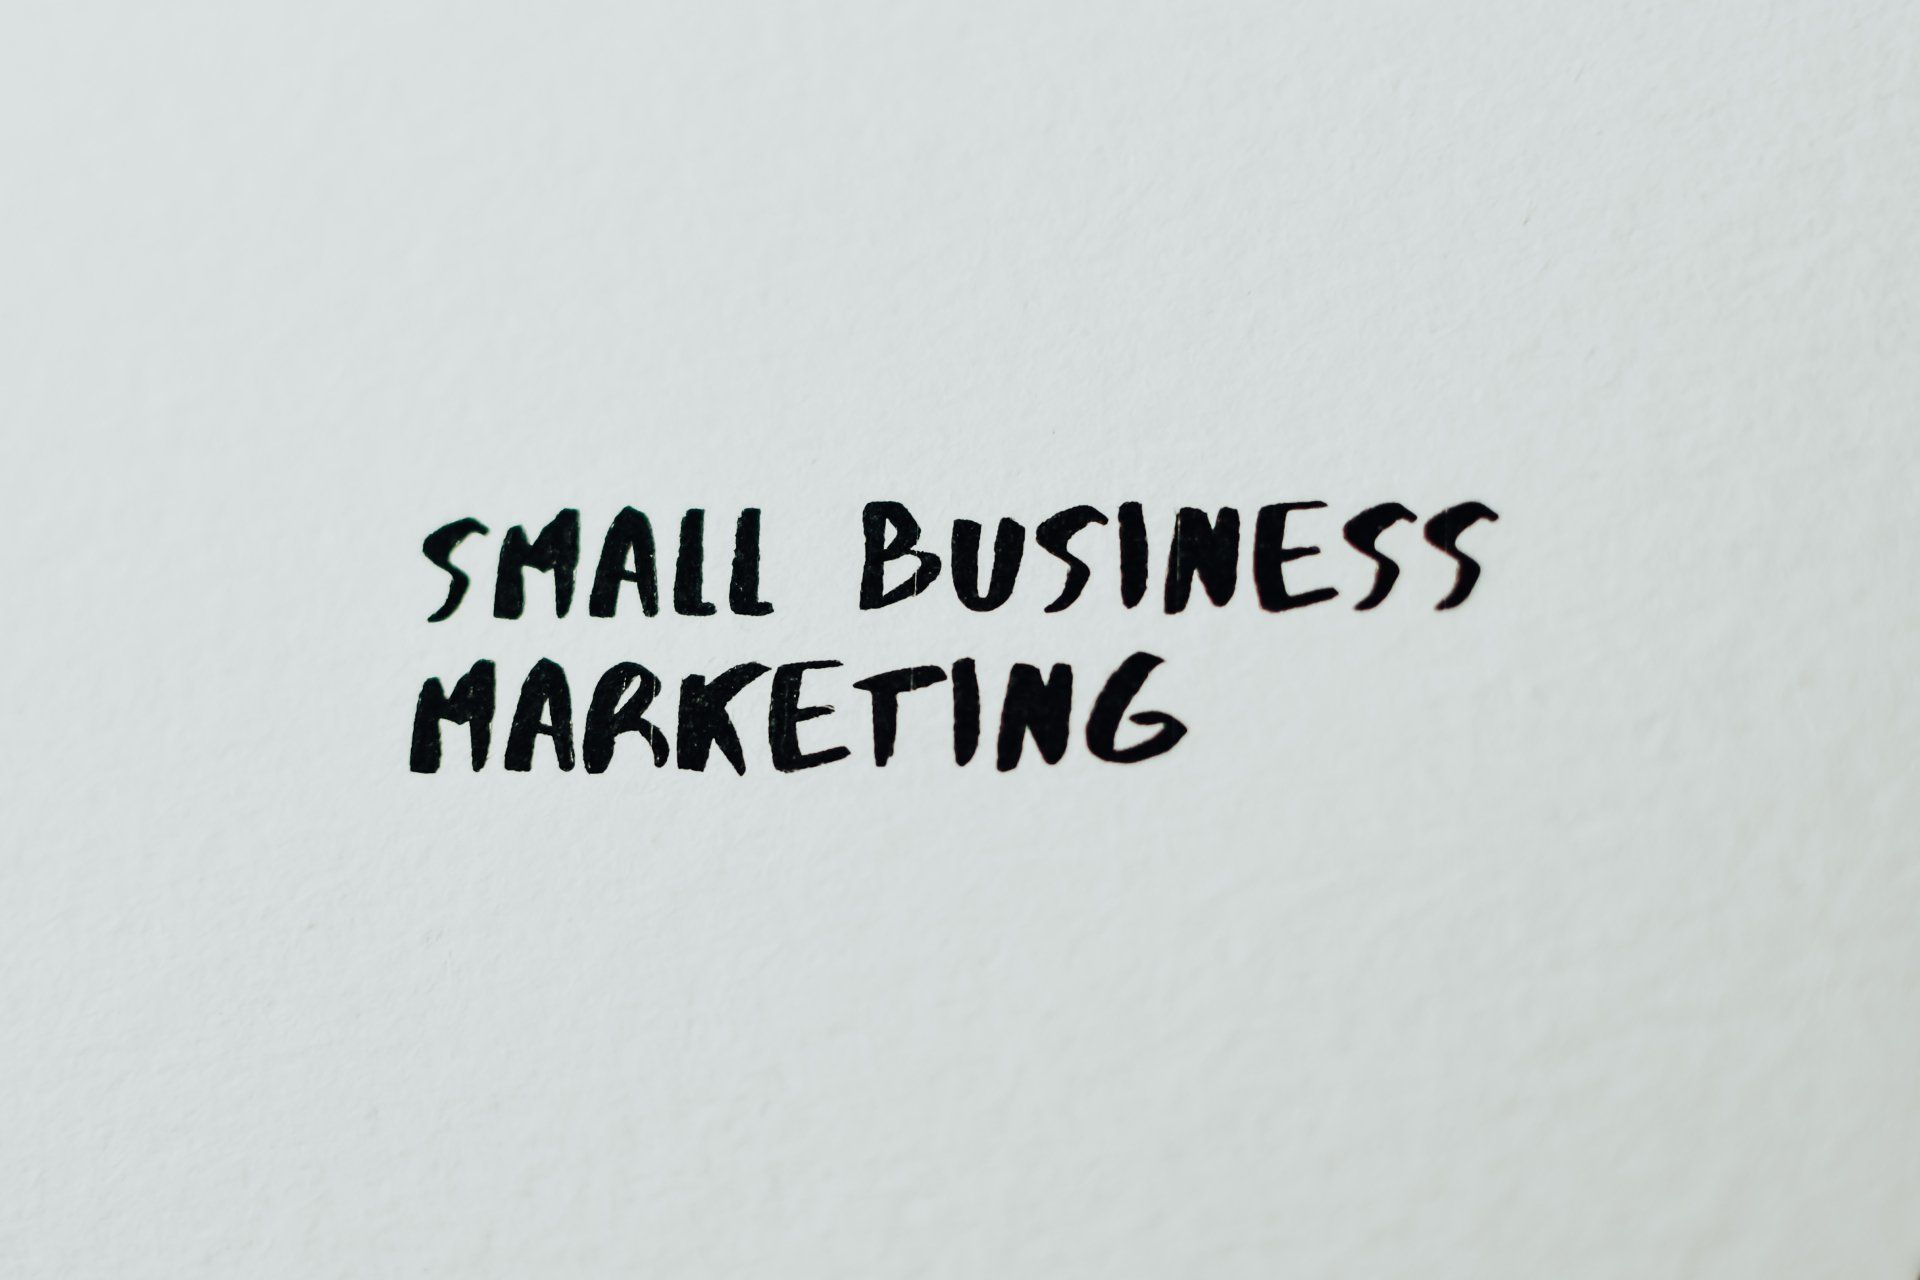 a piece of paper with the words `` small business marketing '' written on it 